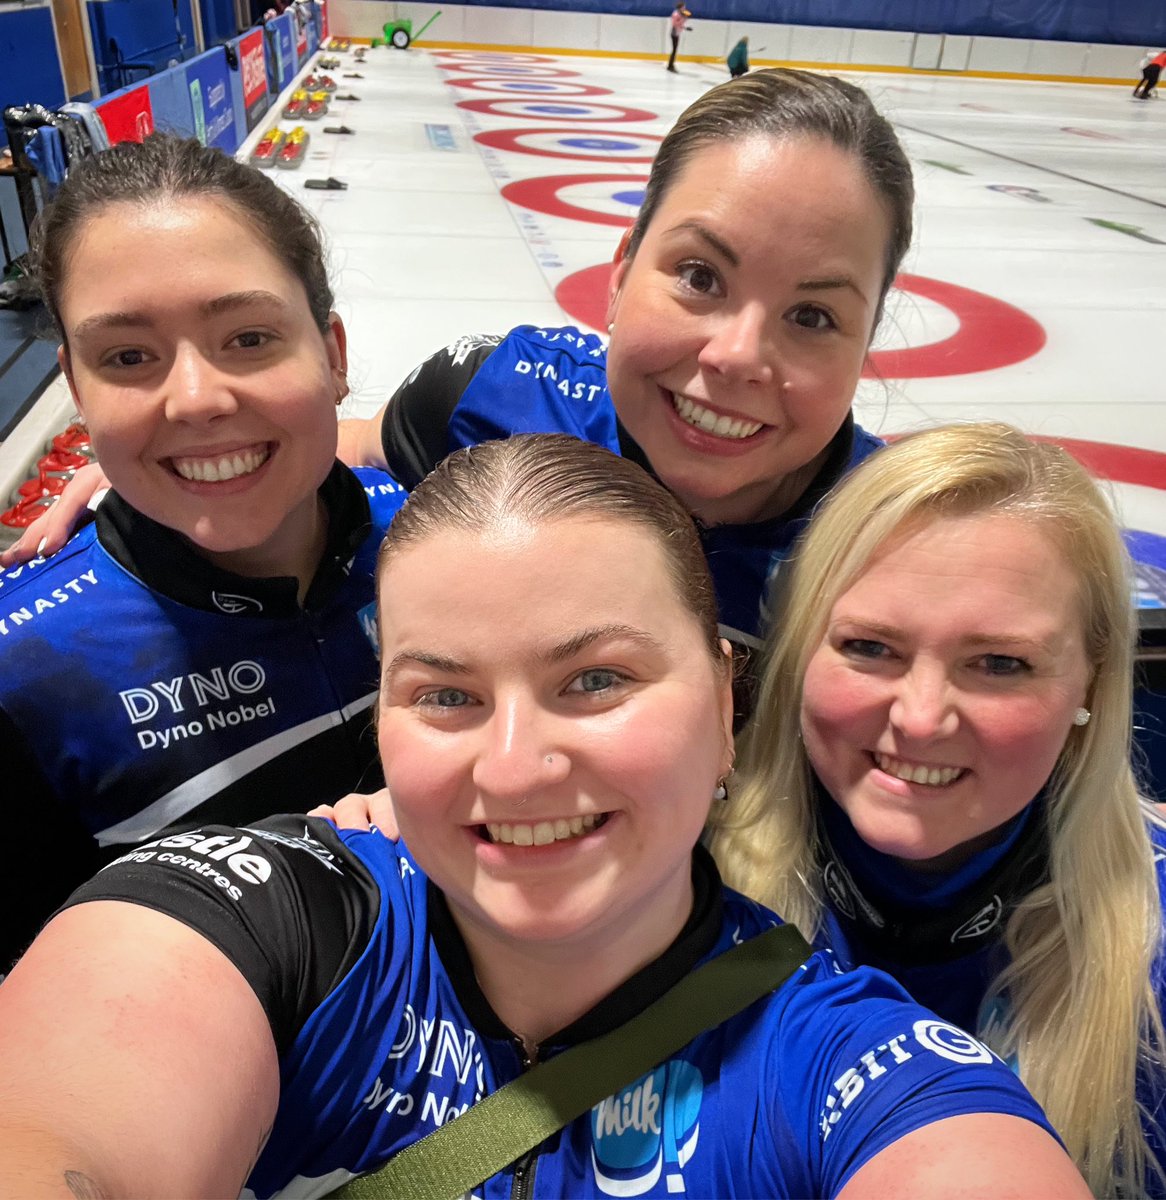 QUALIFIED IN SCOTLAND!! 🏴󠁧󠁢󠁳󠁣󠁴󠁿 With a 4-0 record, we are heading straight to the semis tomorrow at 11am local (6am ET). #MercurePerthMasters #curling